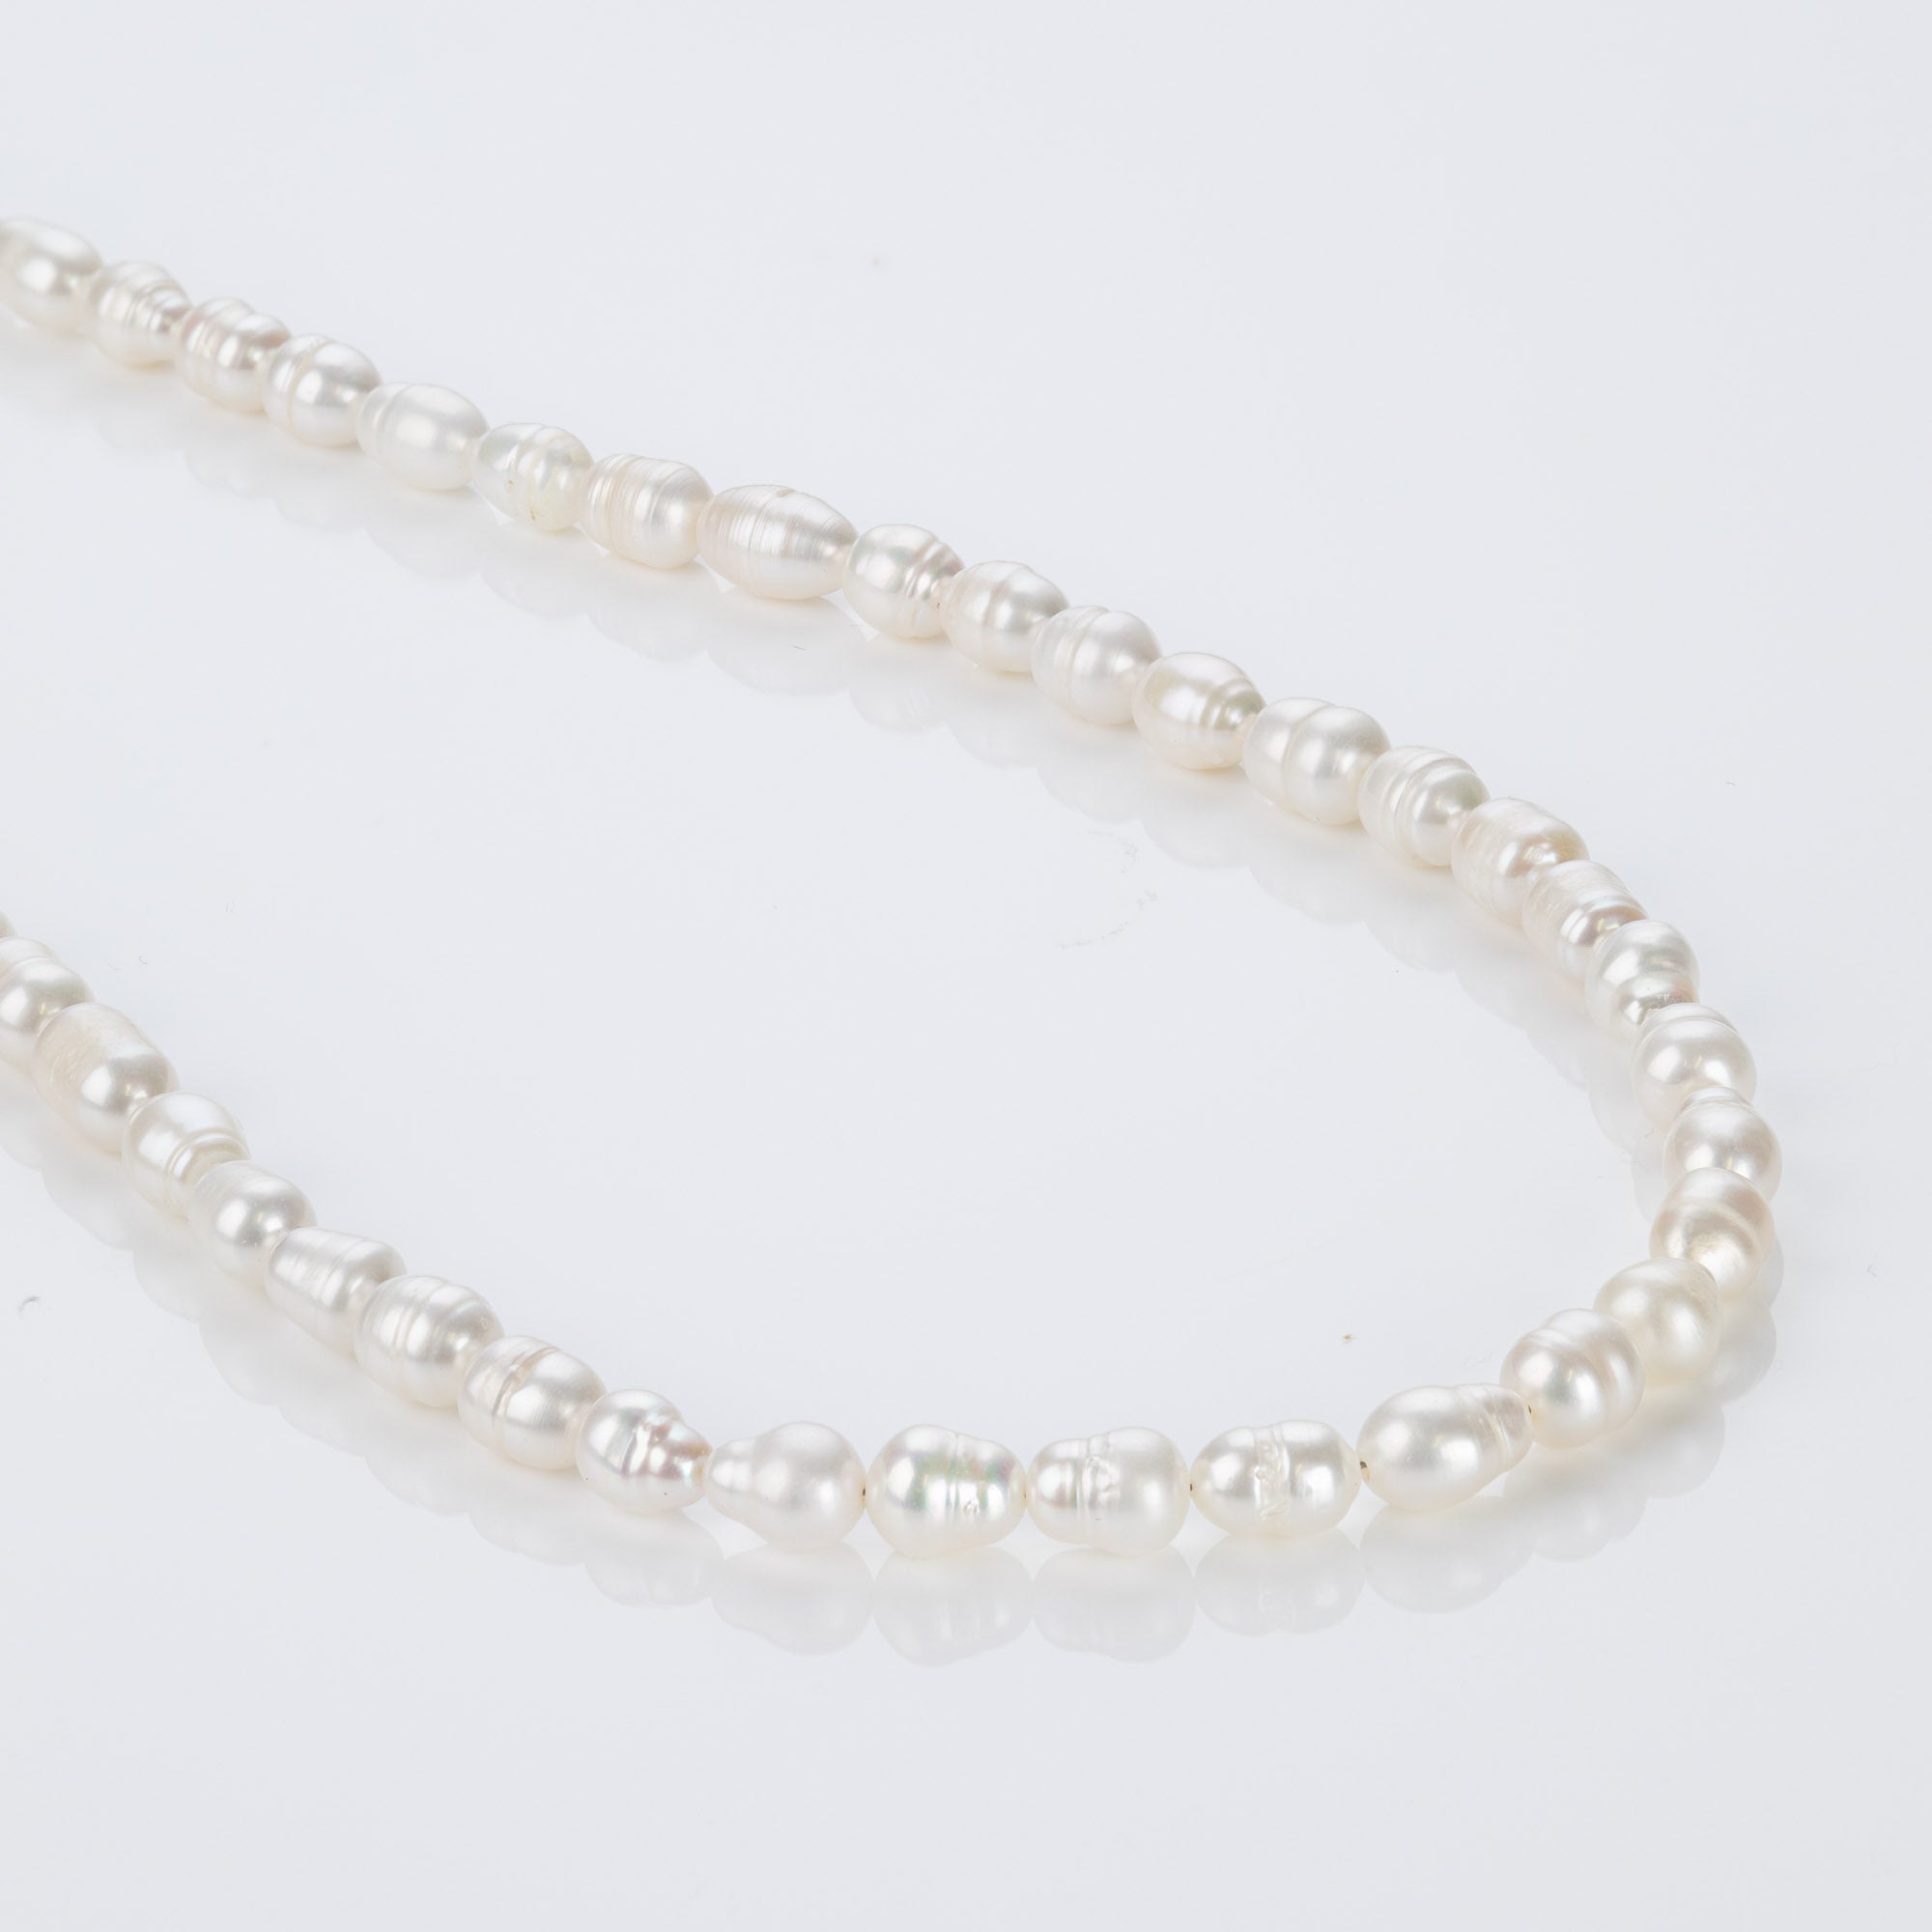 Freshwater Pearl Necklace - Oval Pearls